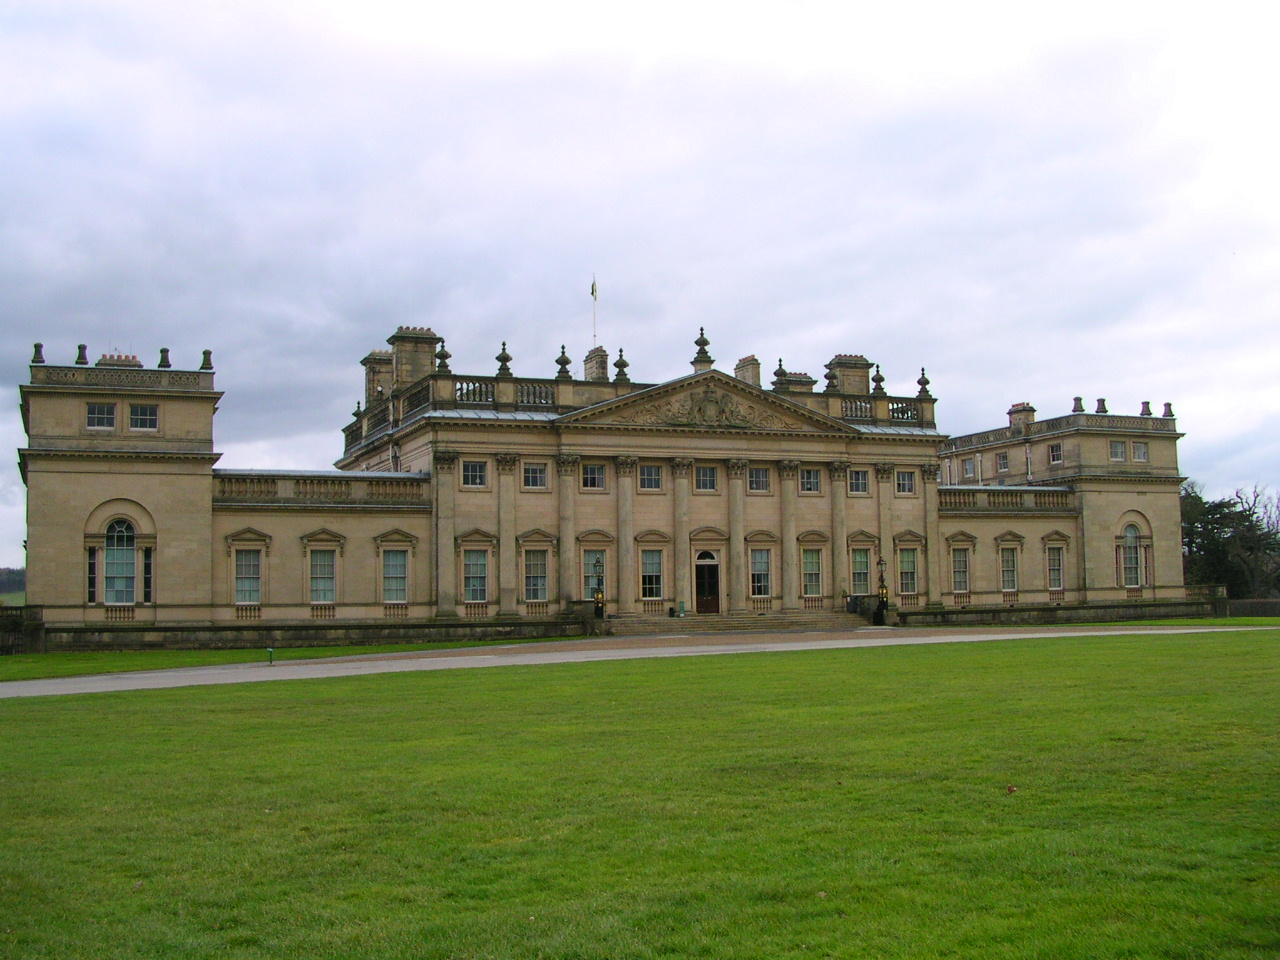 Harewood_House_frontage.JPG